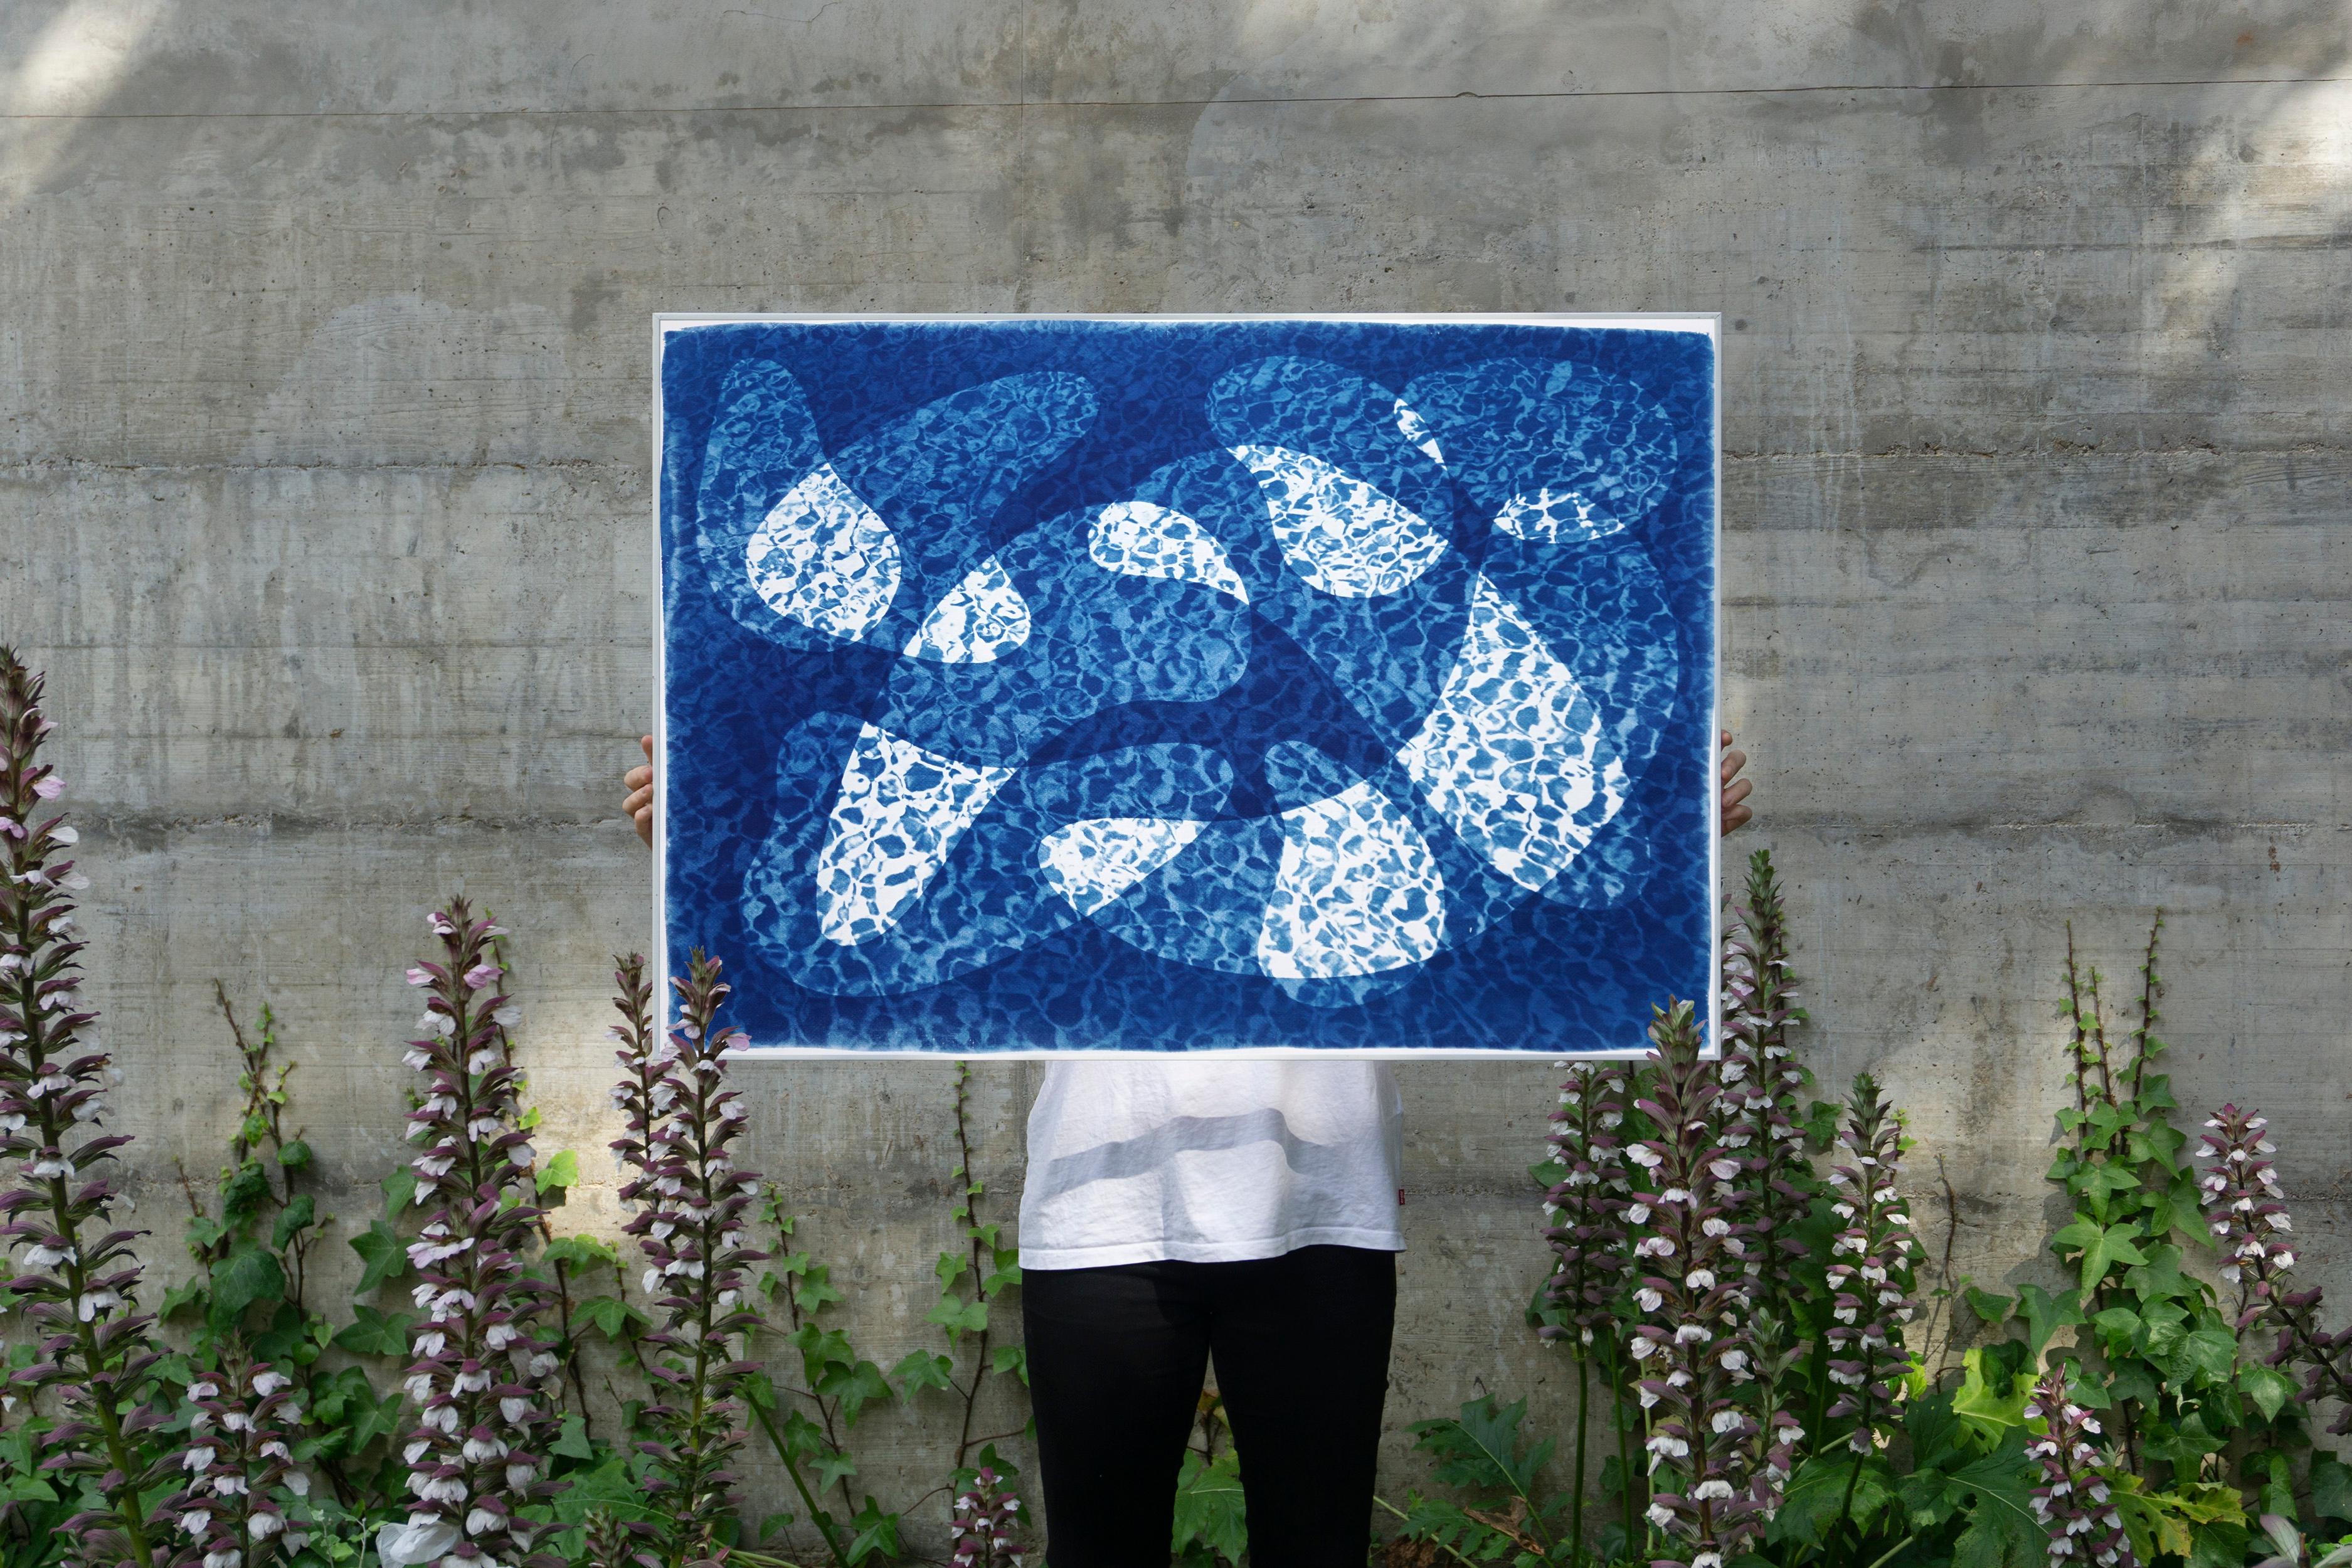 Water Reflection of Fish Under Water, Pool Monotype Cyanotype in Blue Tones For Sale 1